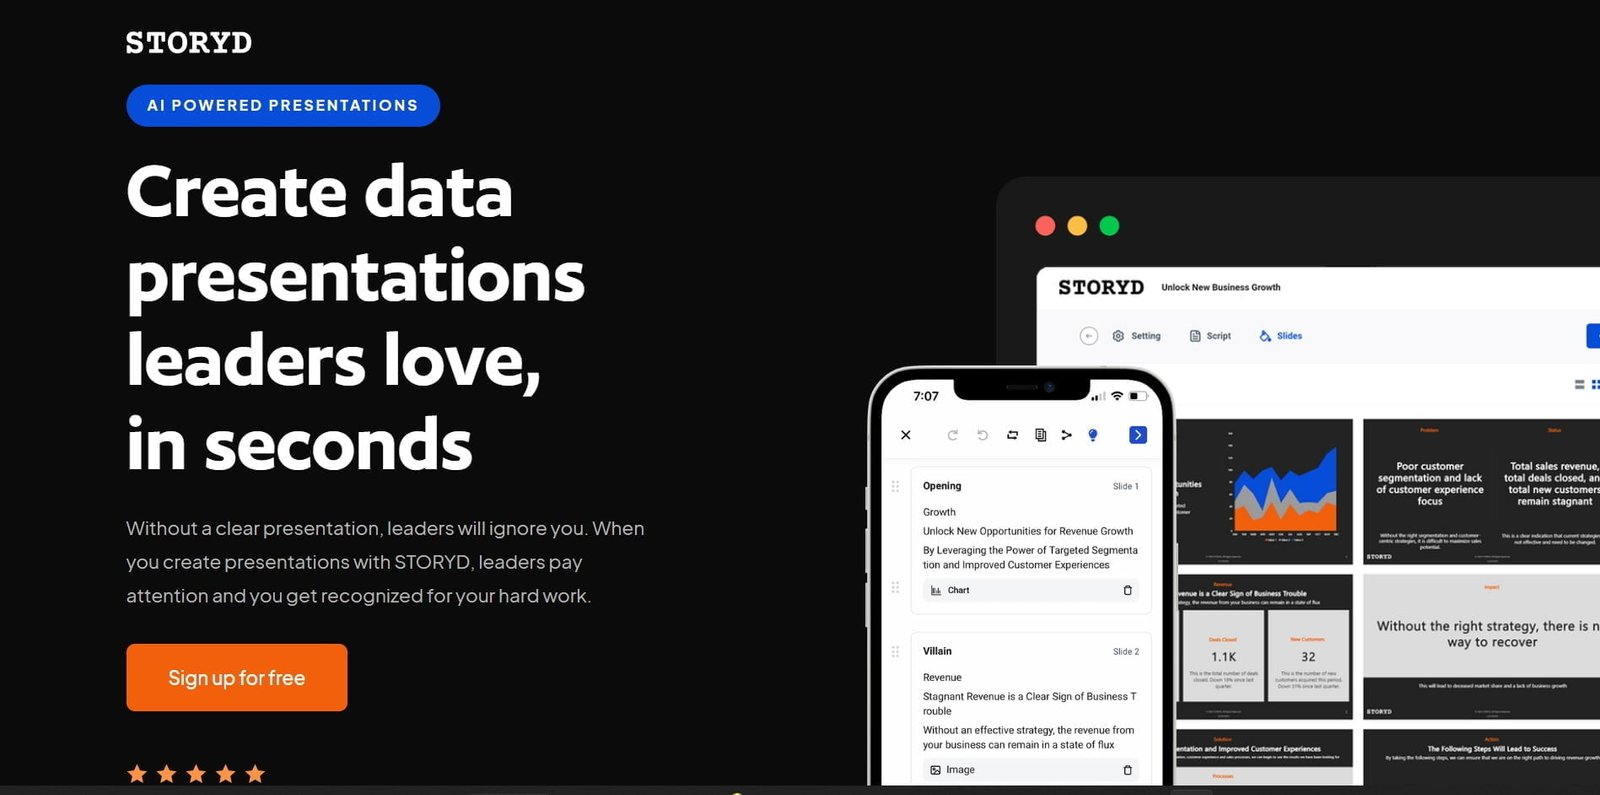 Storyd is an AI-driven presentation tool that simplifies the process of creating data presentations in seconds.